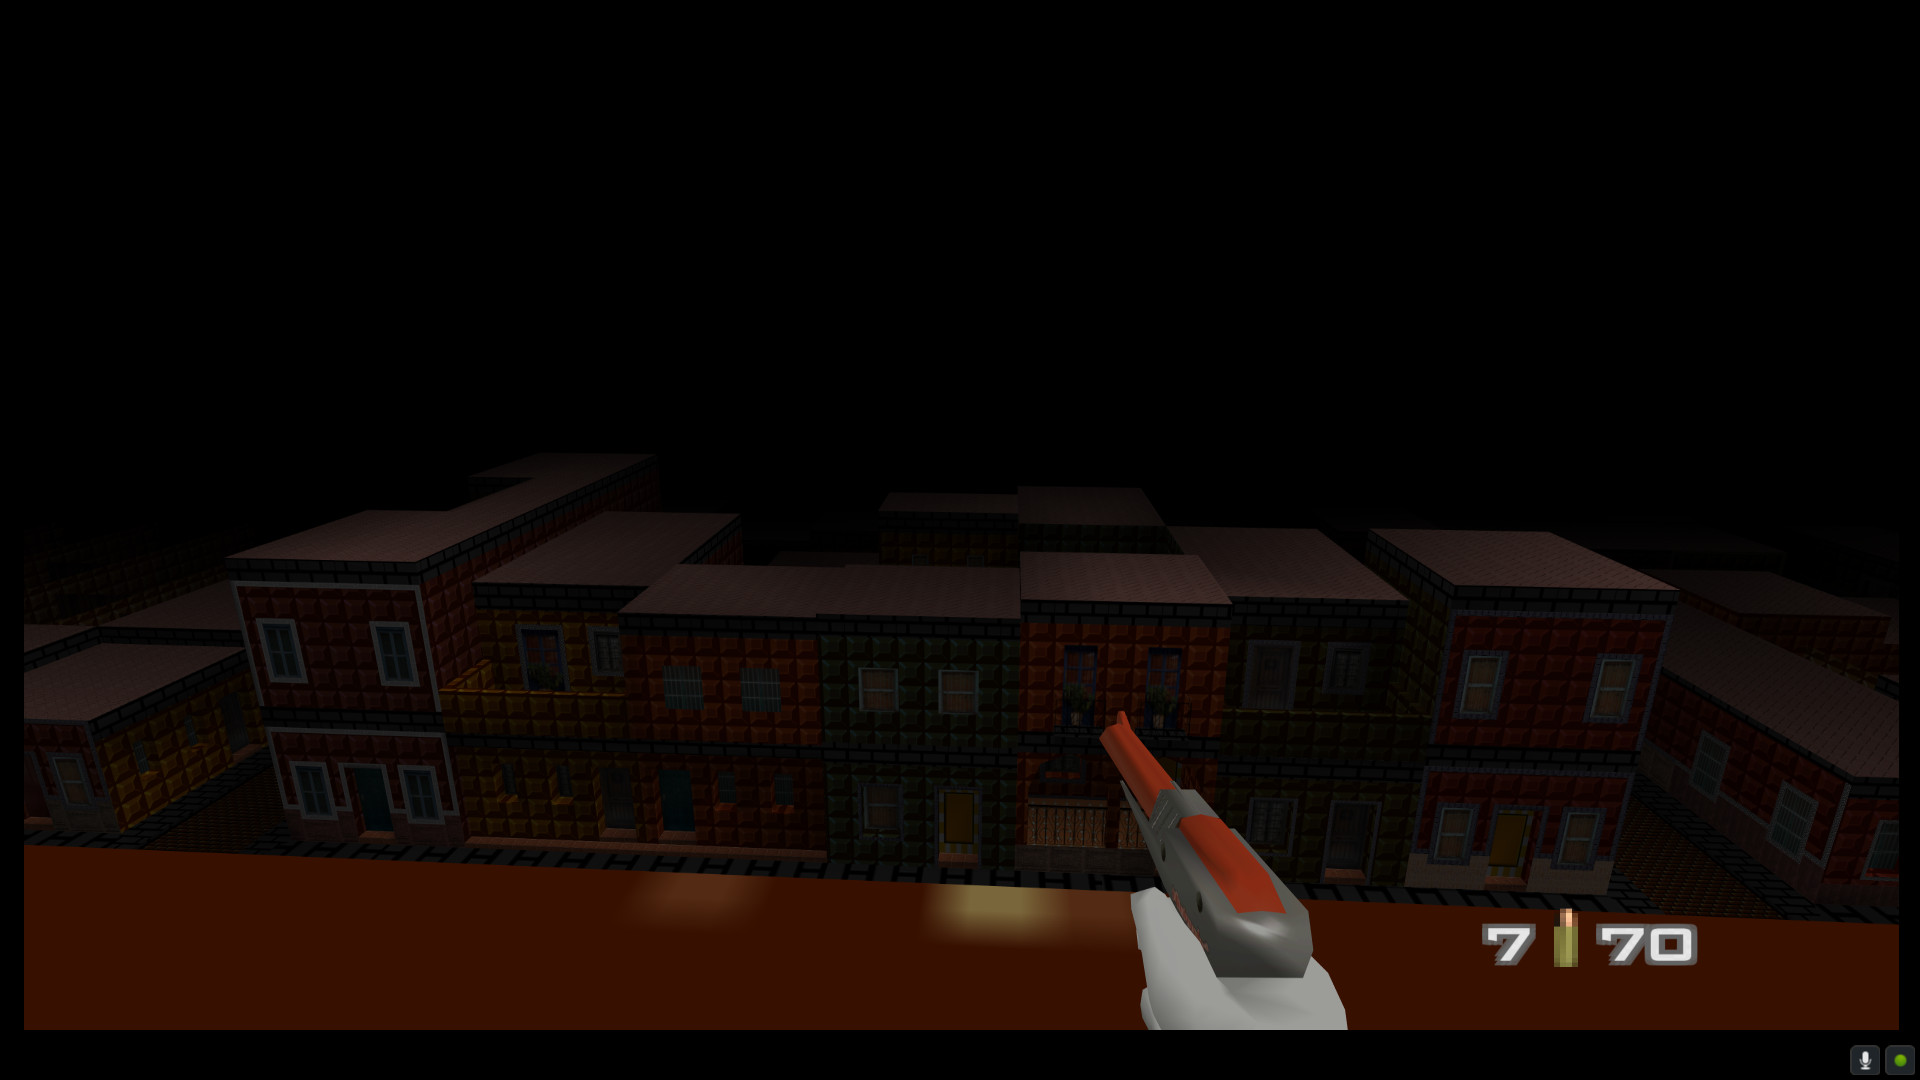 Goldfinger 64 with Mario Characters 1.0 mod for GoldenEye 007 - ModDB